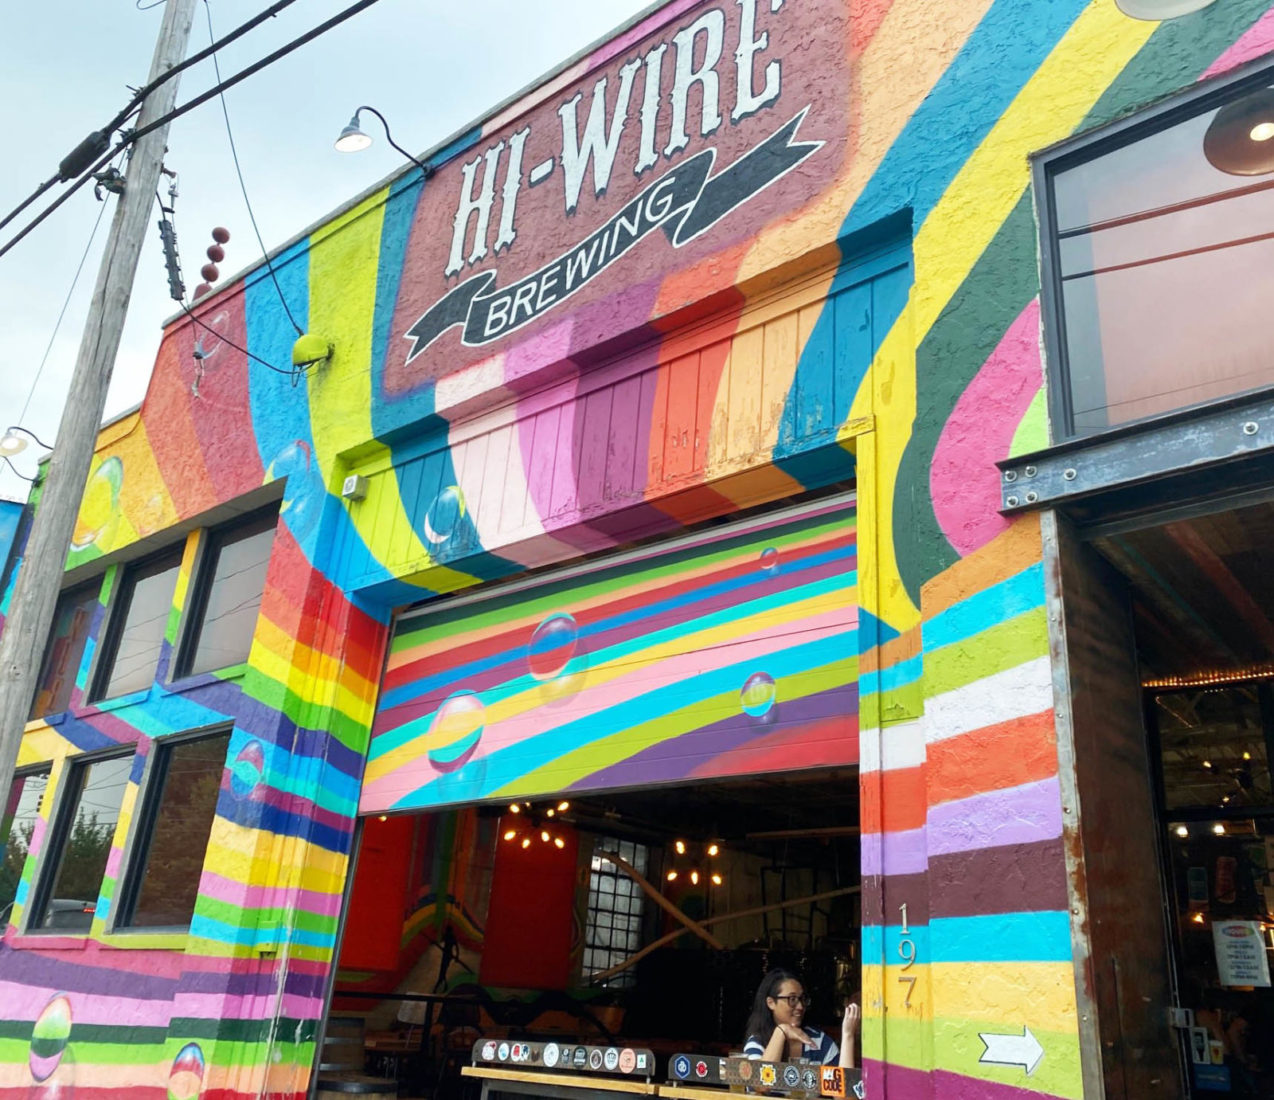 542. Hi-Wire Brewing, Asheville NC, 2022